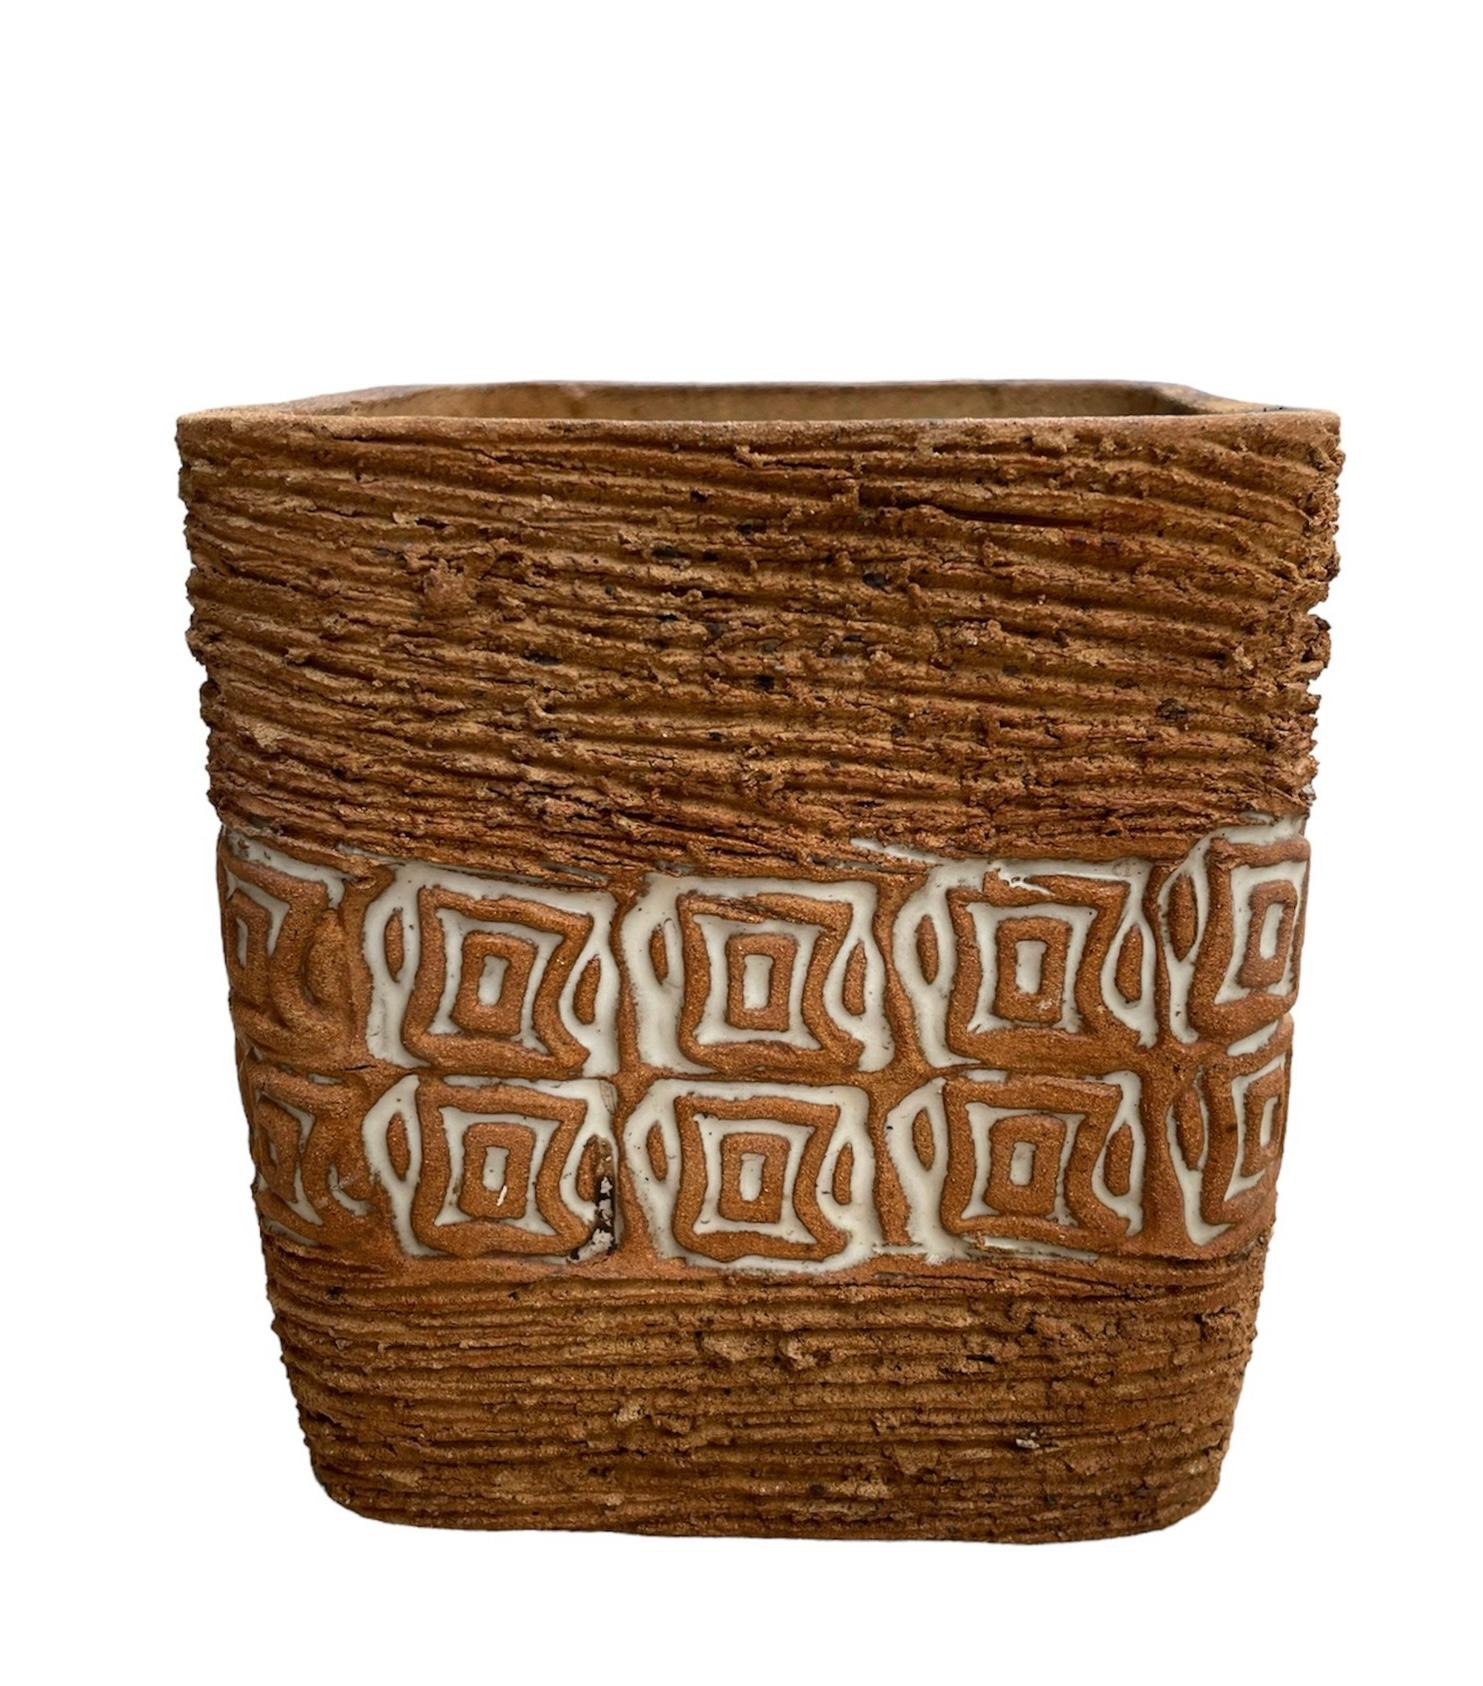 This is a Puerto Rican Stoneware Planter. It depicts a light brown small square planter decorated with a cluster of noodles all around, then its center is enhanced by two rows of small and large squares figures with a white square background. Below